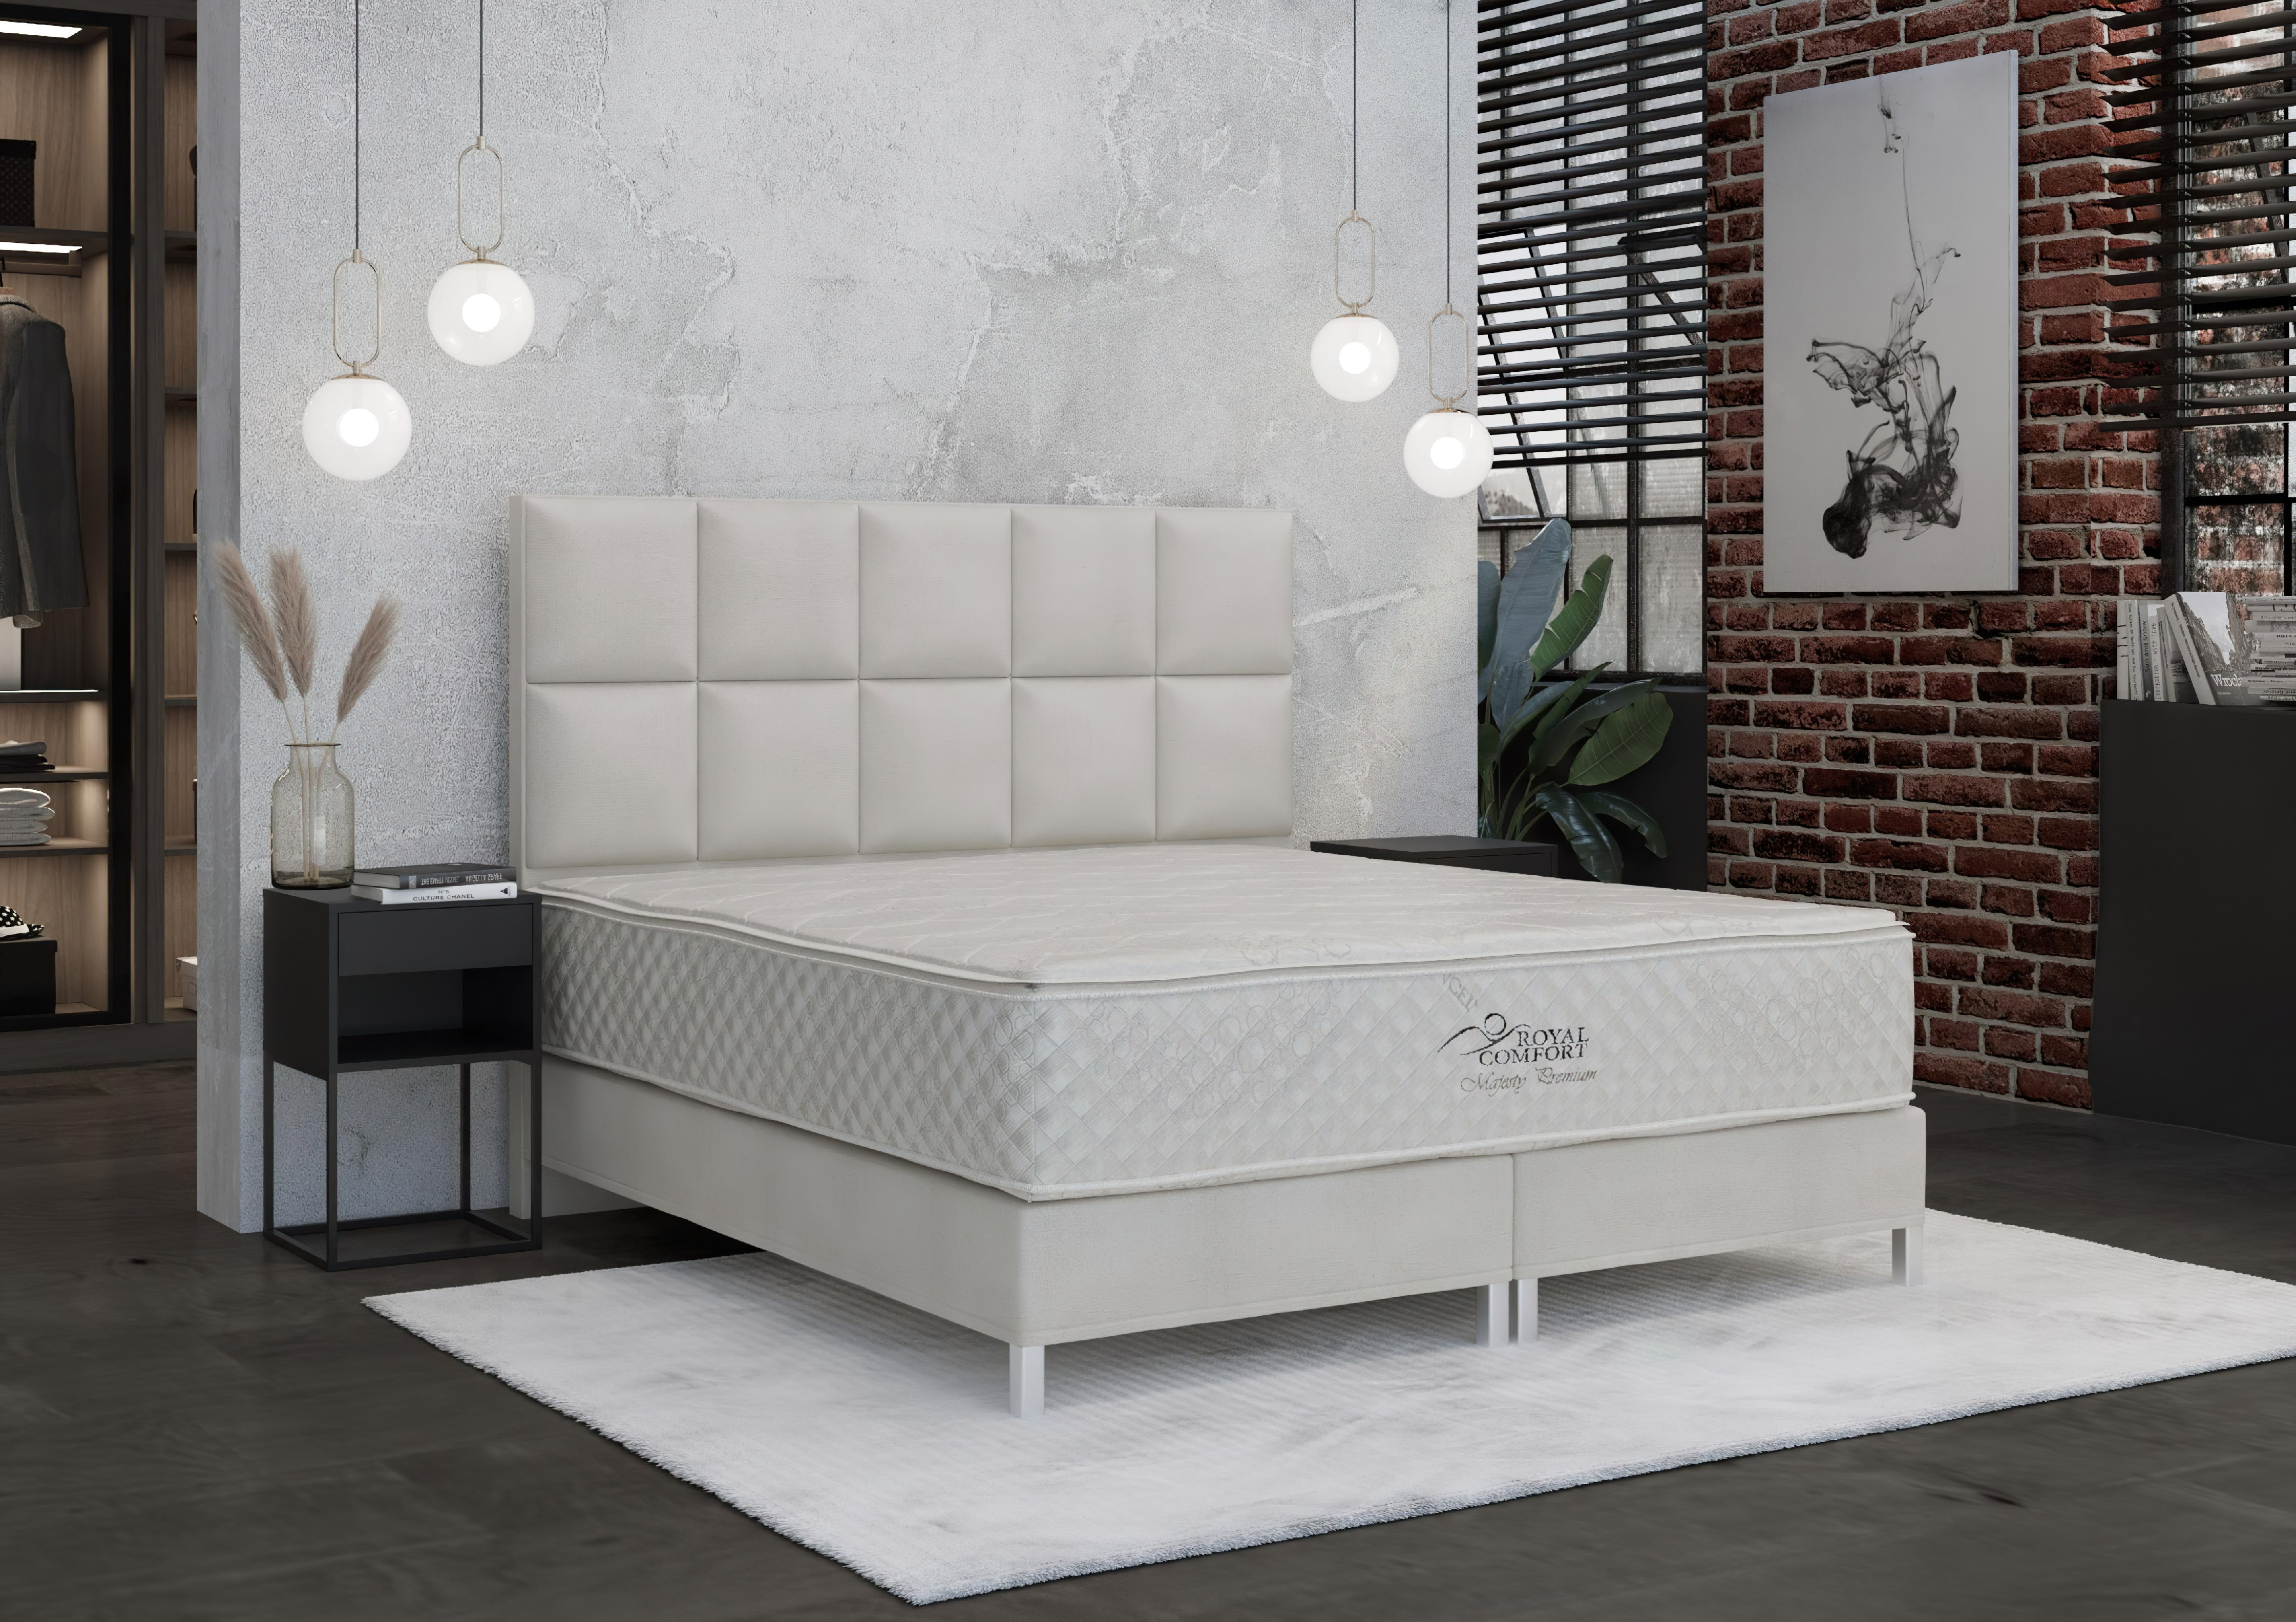 How the Magnum ONLINE EDITION continental bed will affect your health and lifestyle